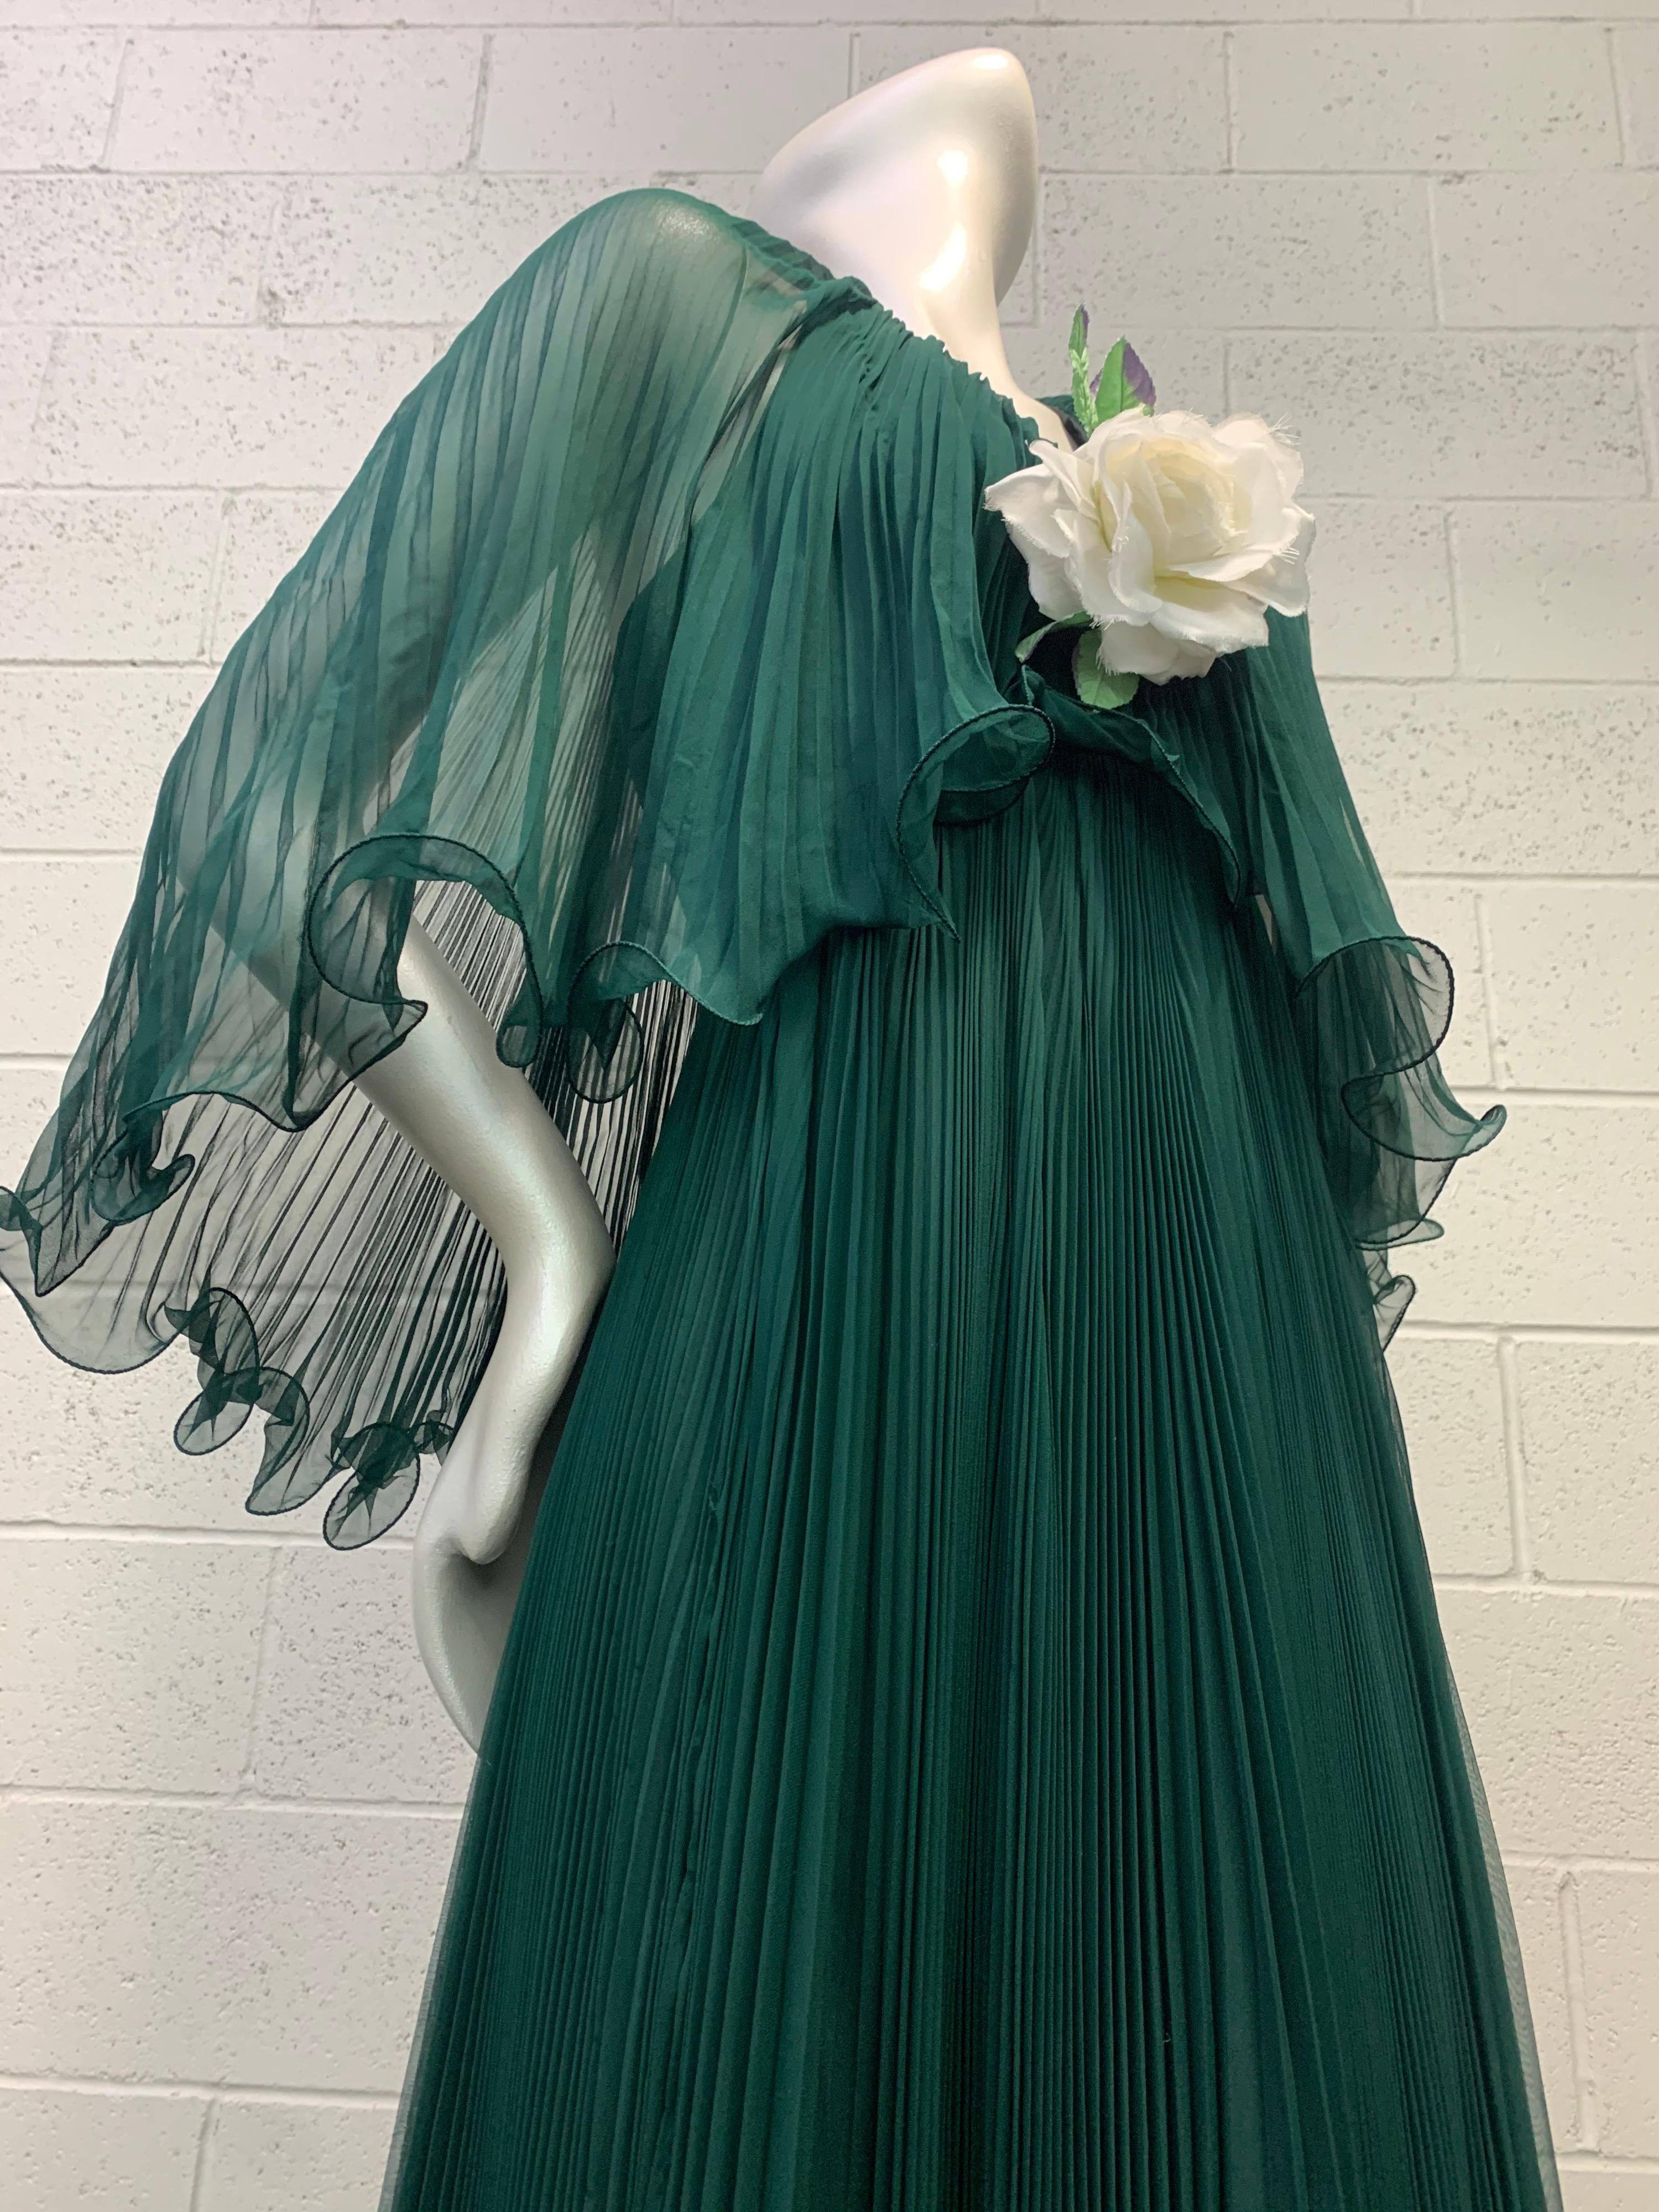 A lovely forest green 1970s pleated silk chiffon halter dress from Martha, the world-famous high end retailer. Voluminous accordion pleated chiffon overlay forms a caplet over this divine halter dress accented with a white silk rose at center bust.